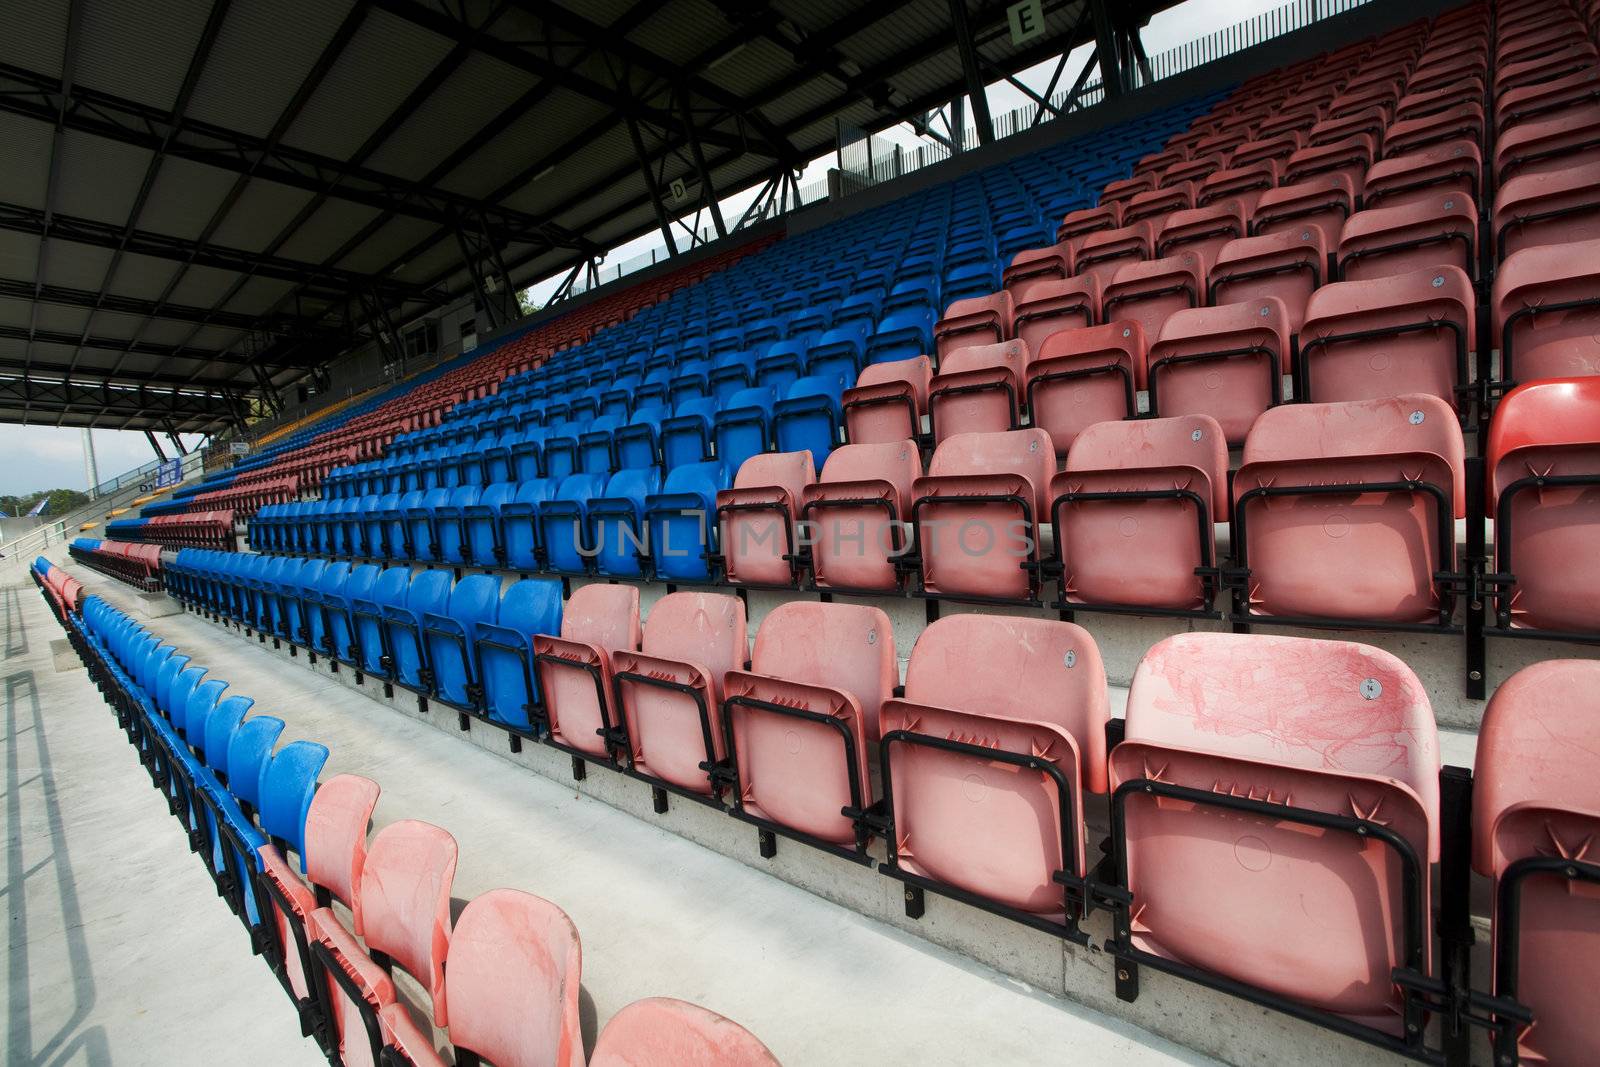 An image of empty seats of the stadium